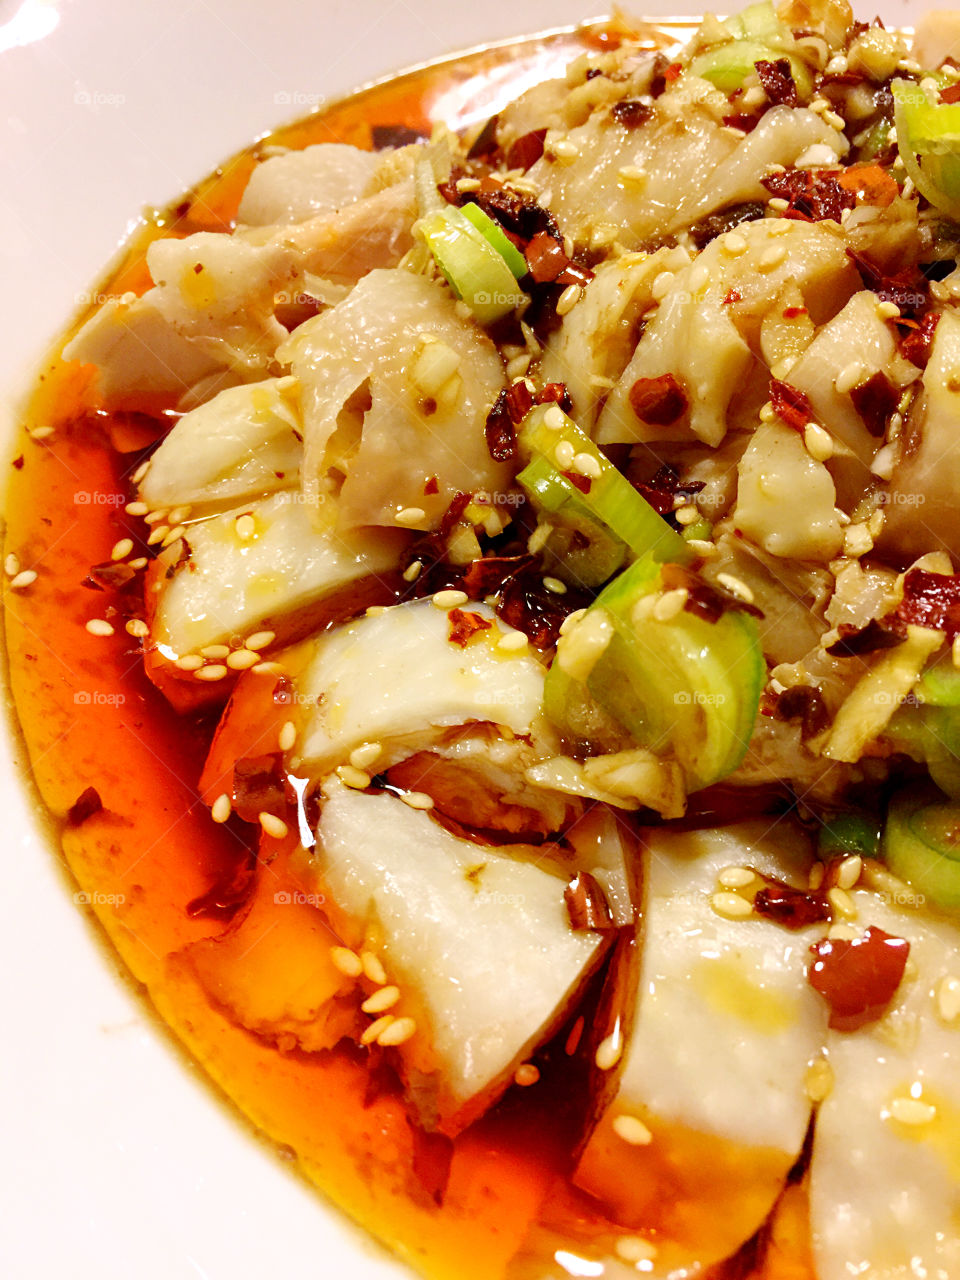 Chicken with savory and spicy sauce